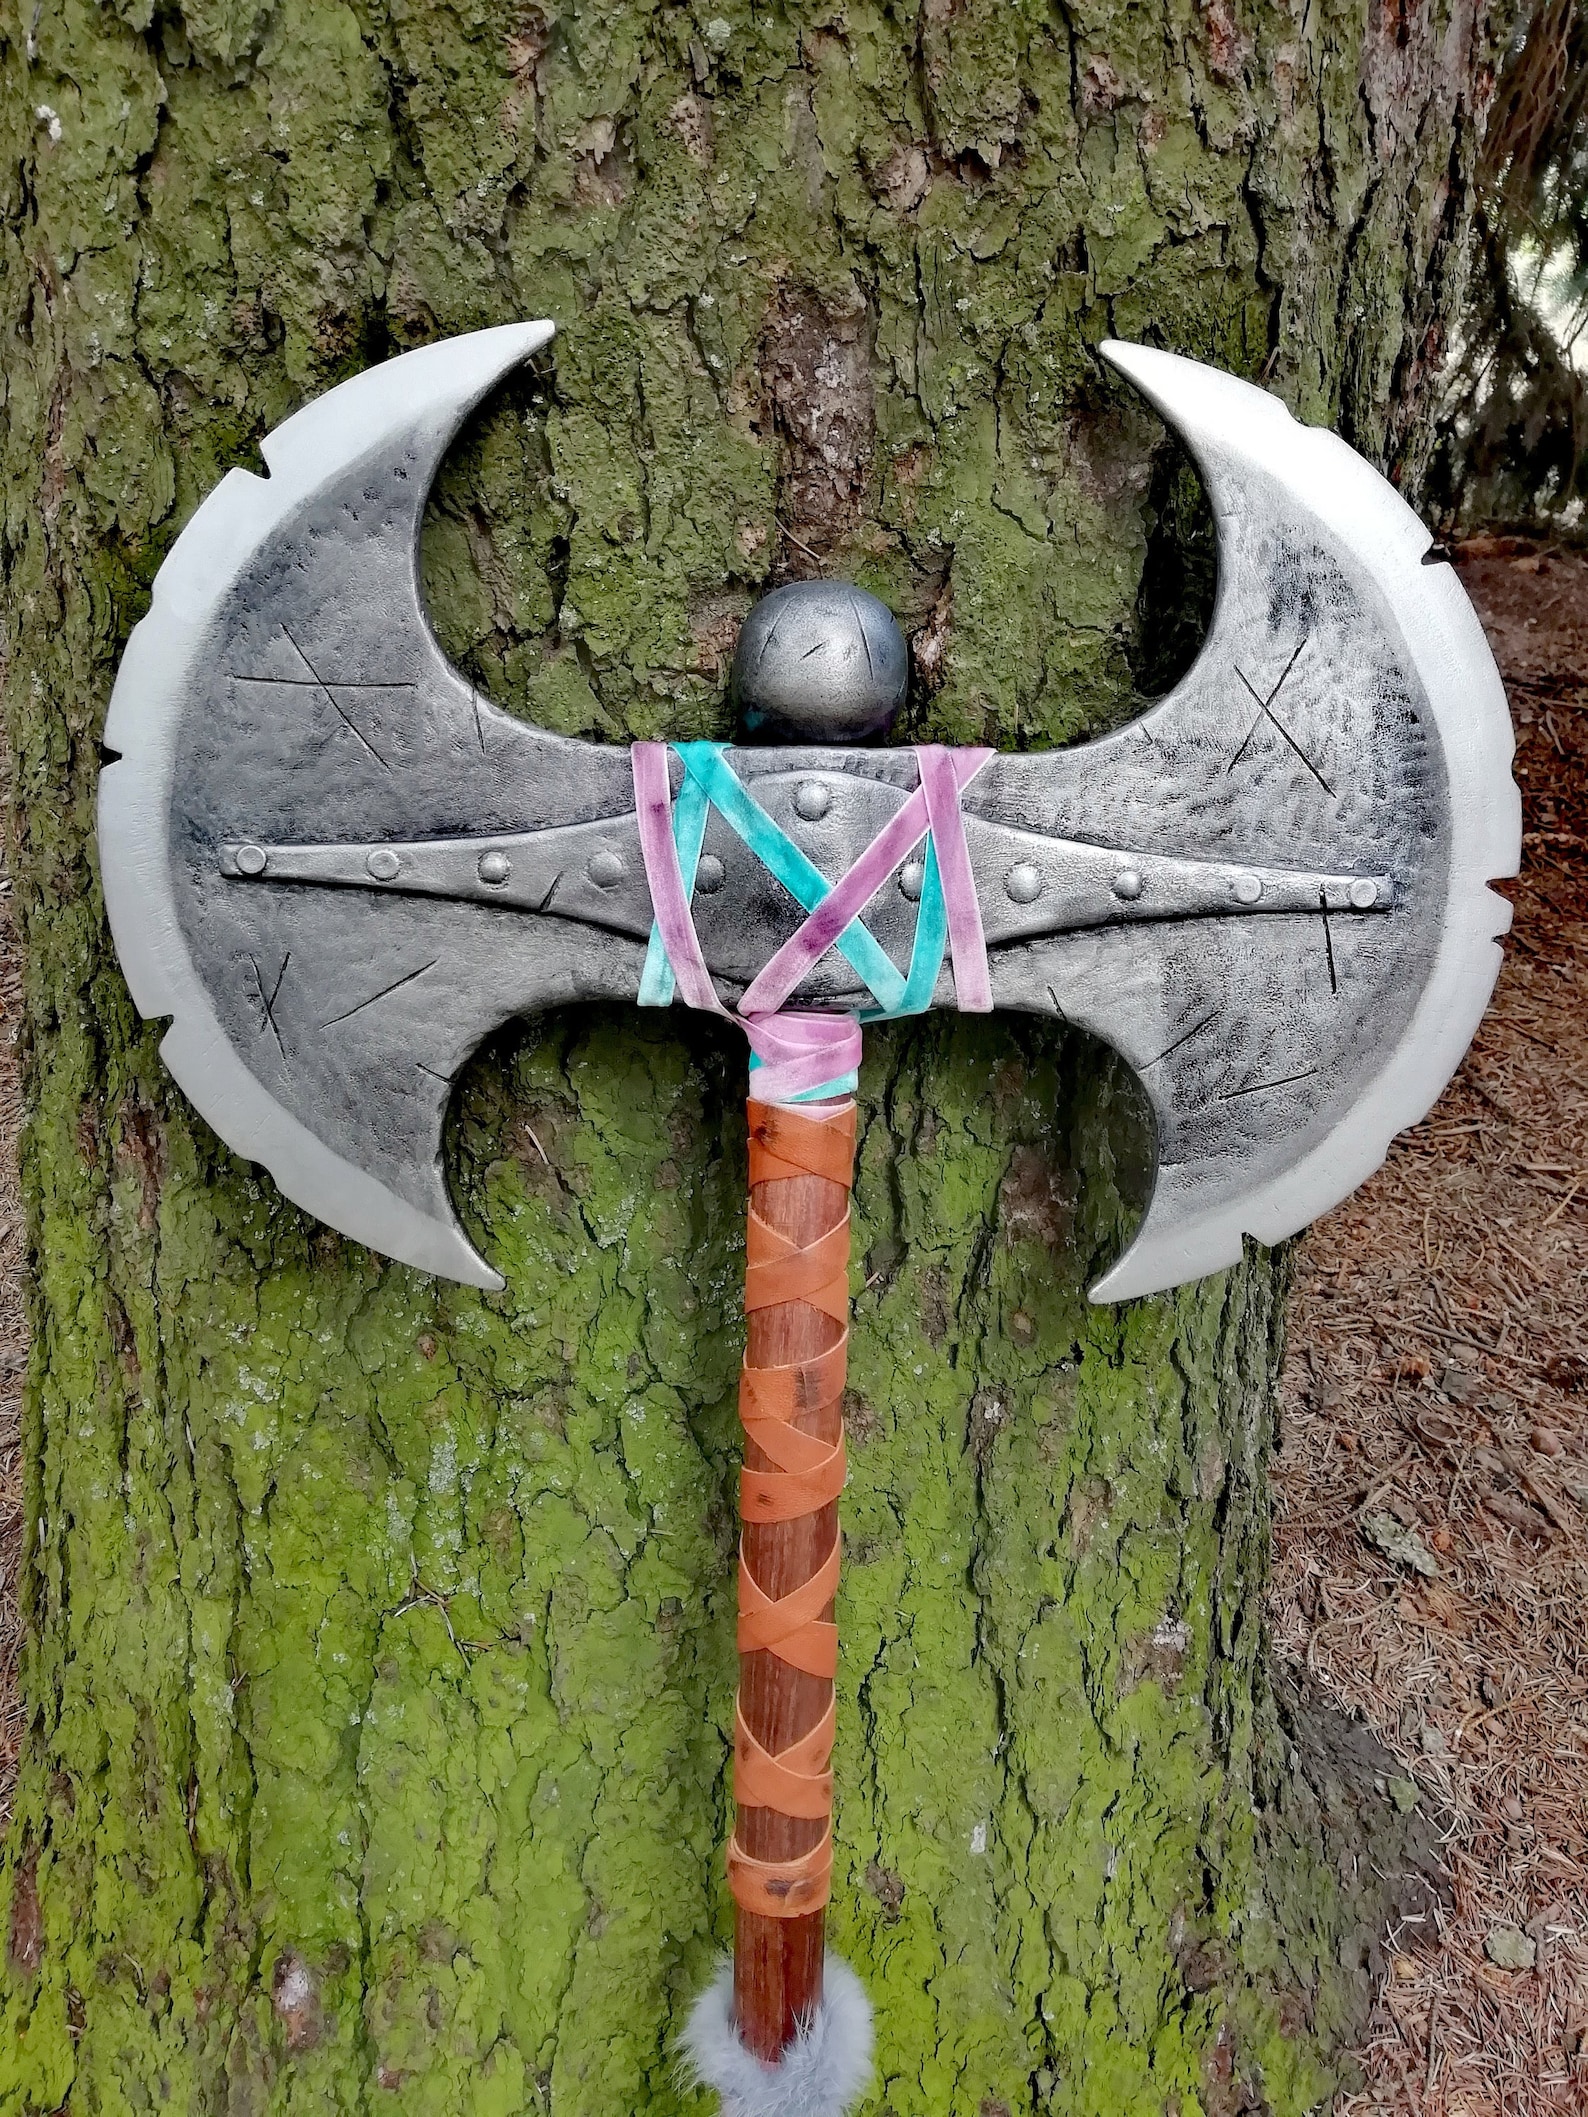 How to train your dragon. Astrid's axe. Fan art. Prop. | Etsy